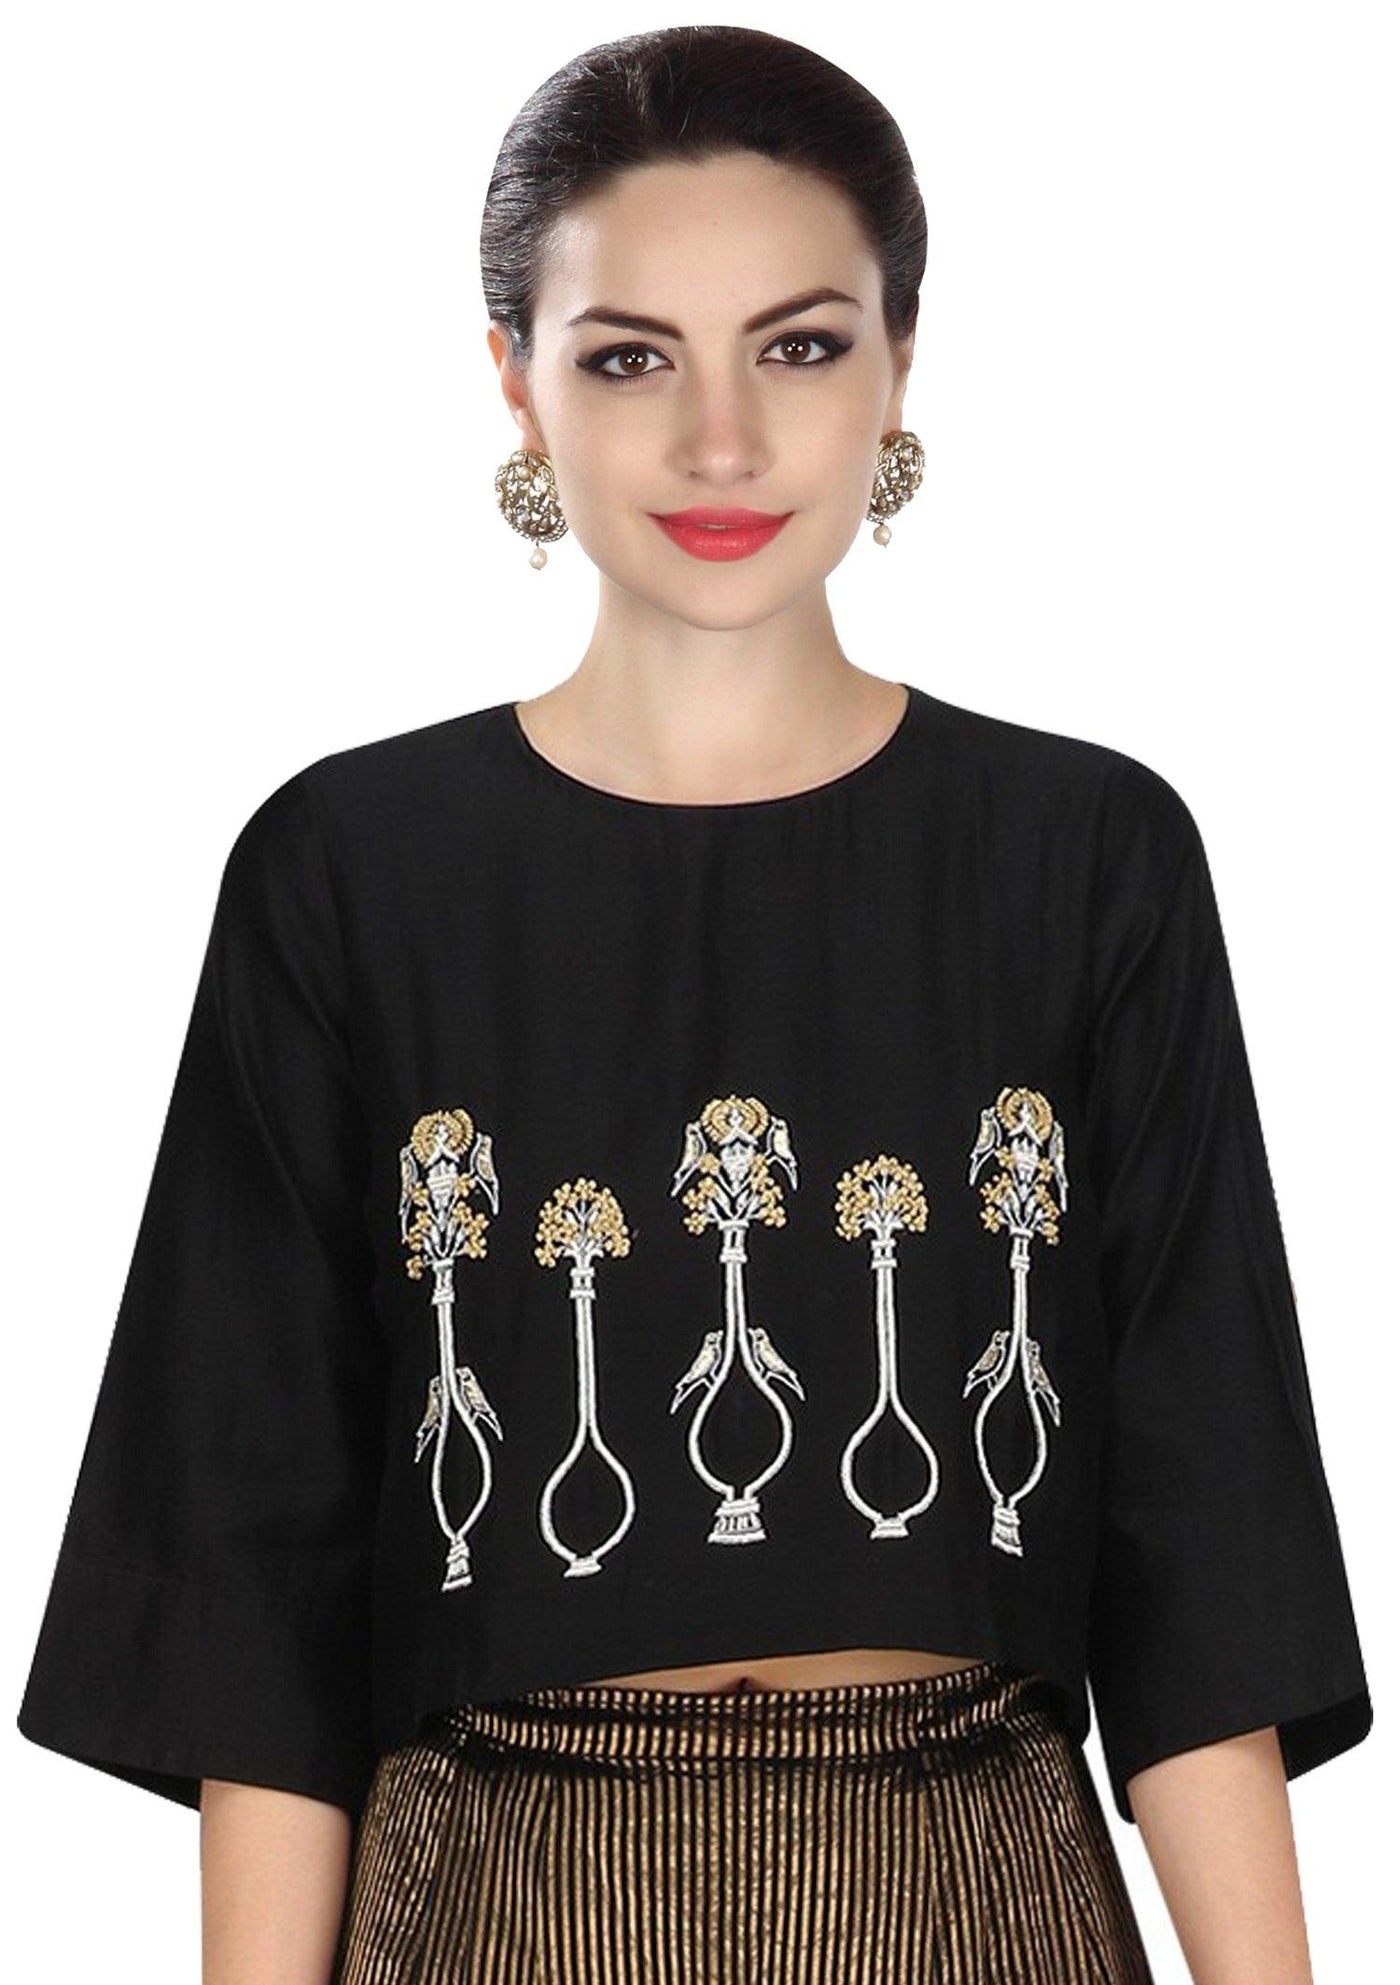 Black Potted Plant Motifs Top by Qivii